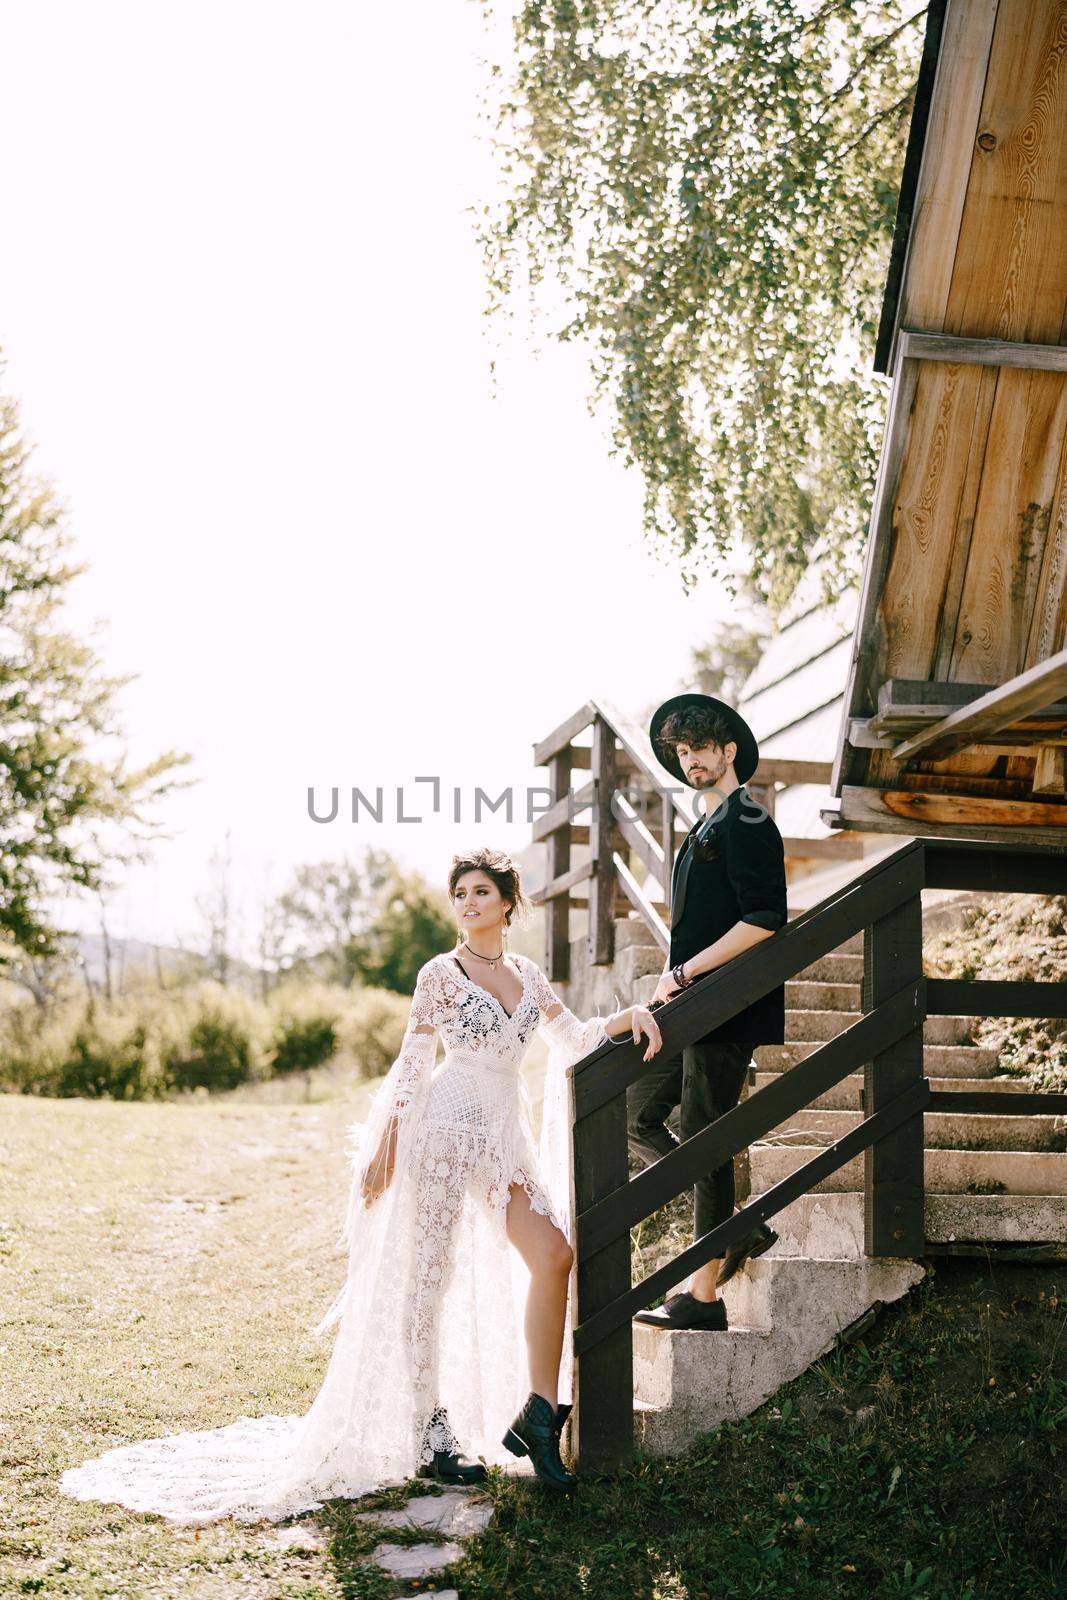 Groom and bride stand on the stone steps near the wooden hut. High quality photo